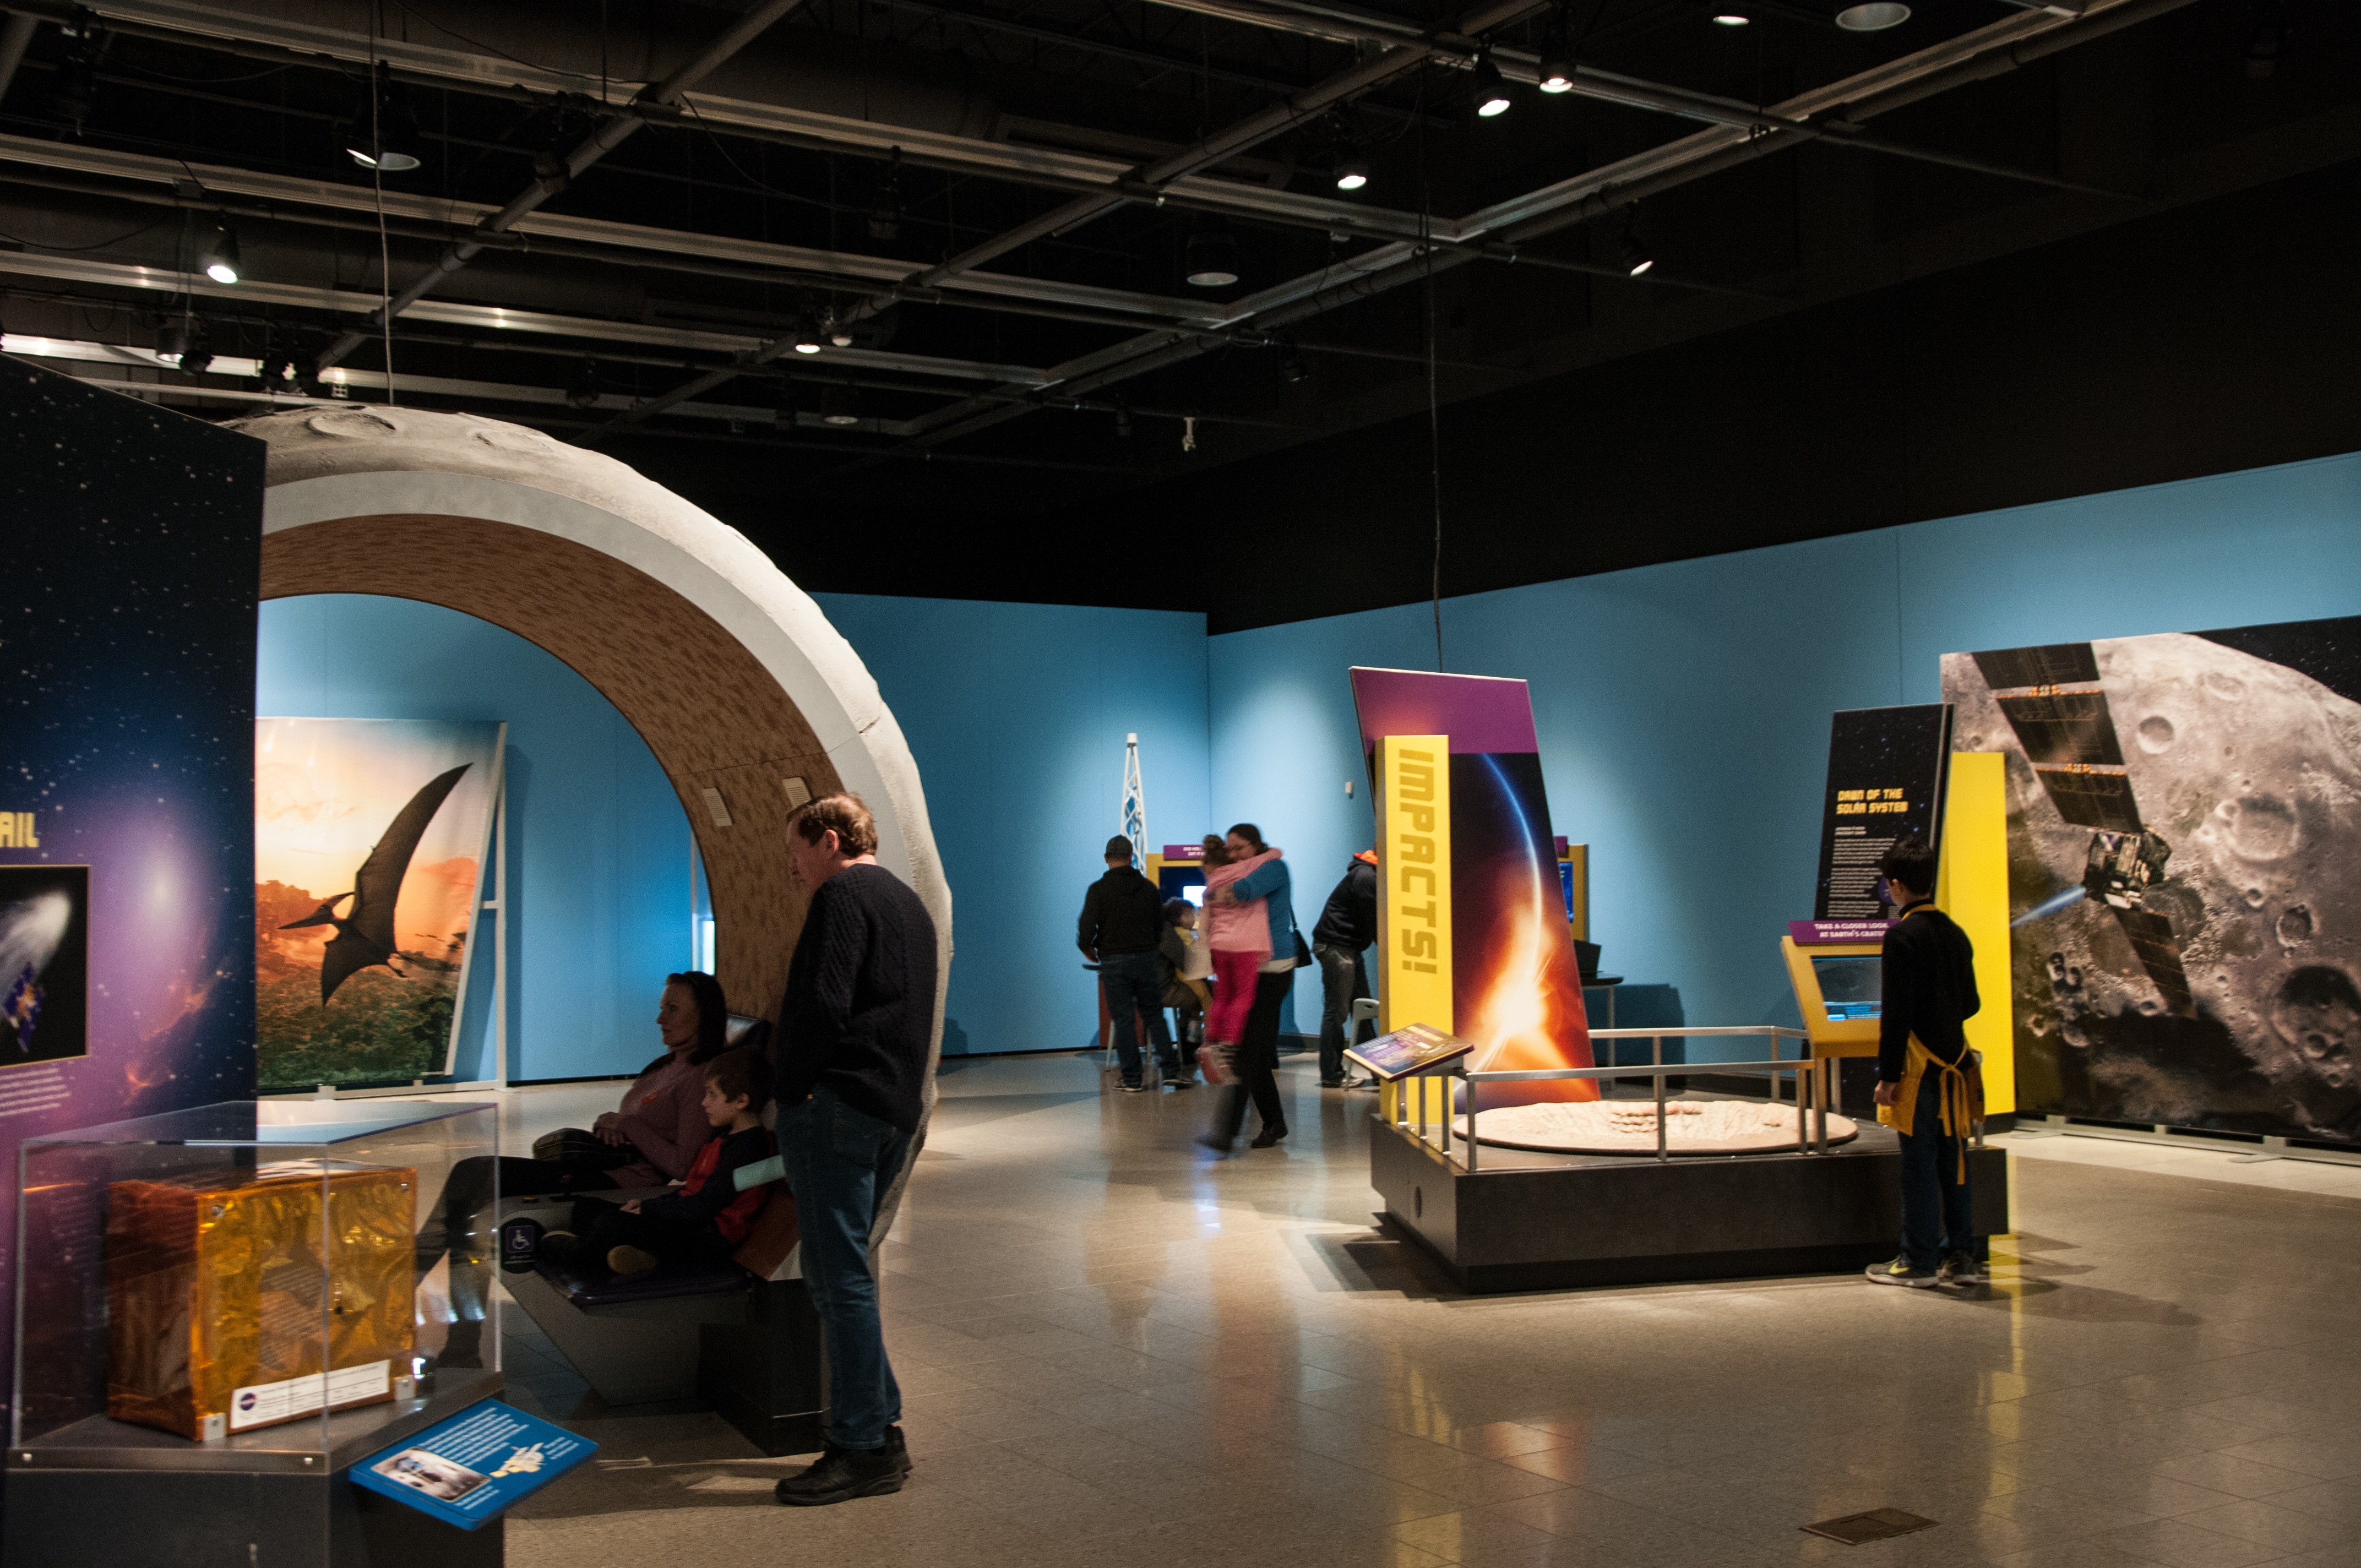 Great Balls of Fire space themed science exhibit extended through August